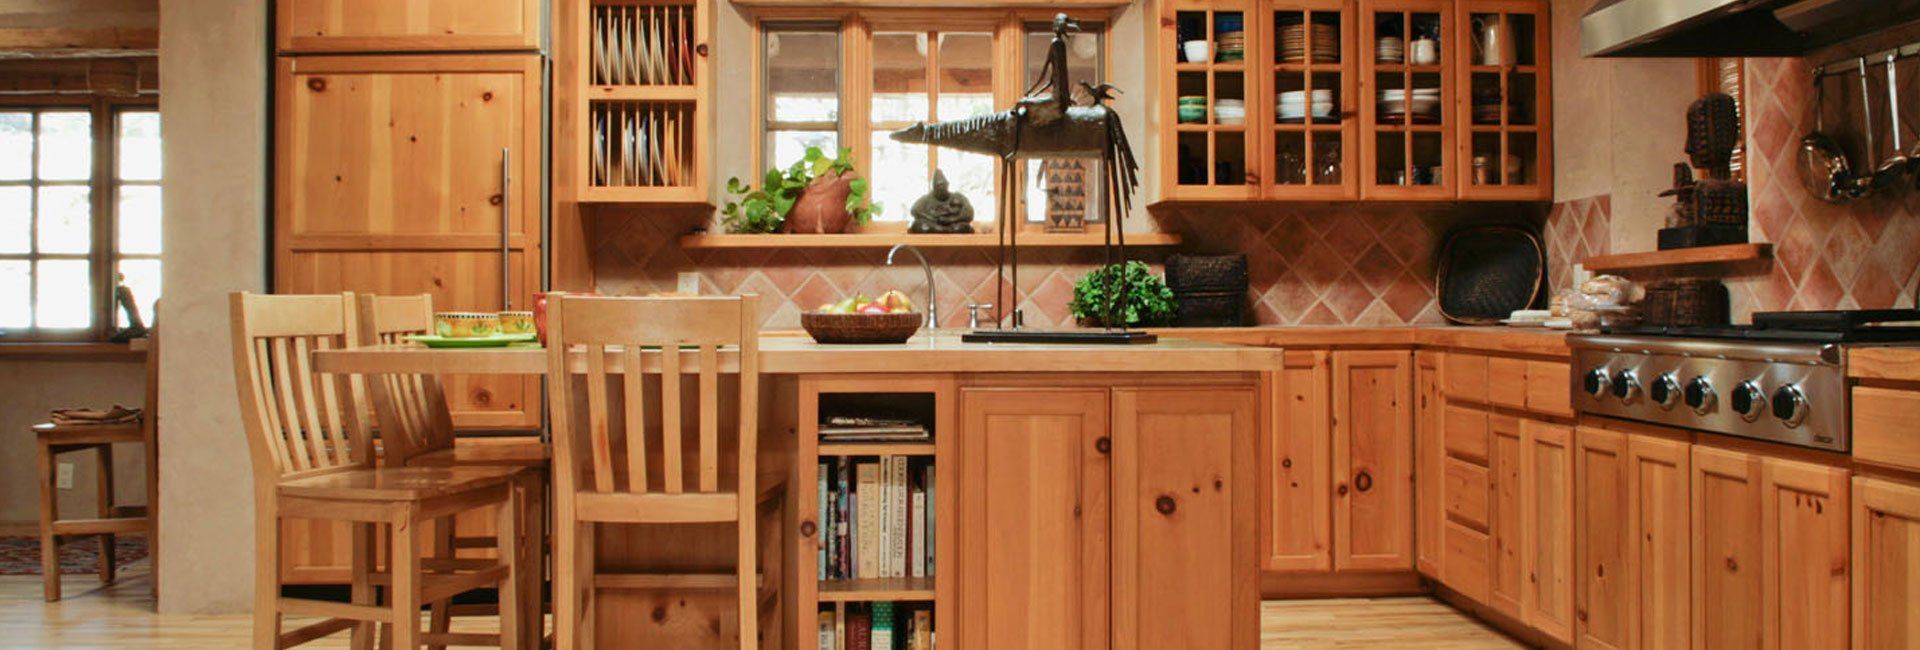 well-furnished kitchen with timber work